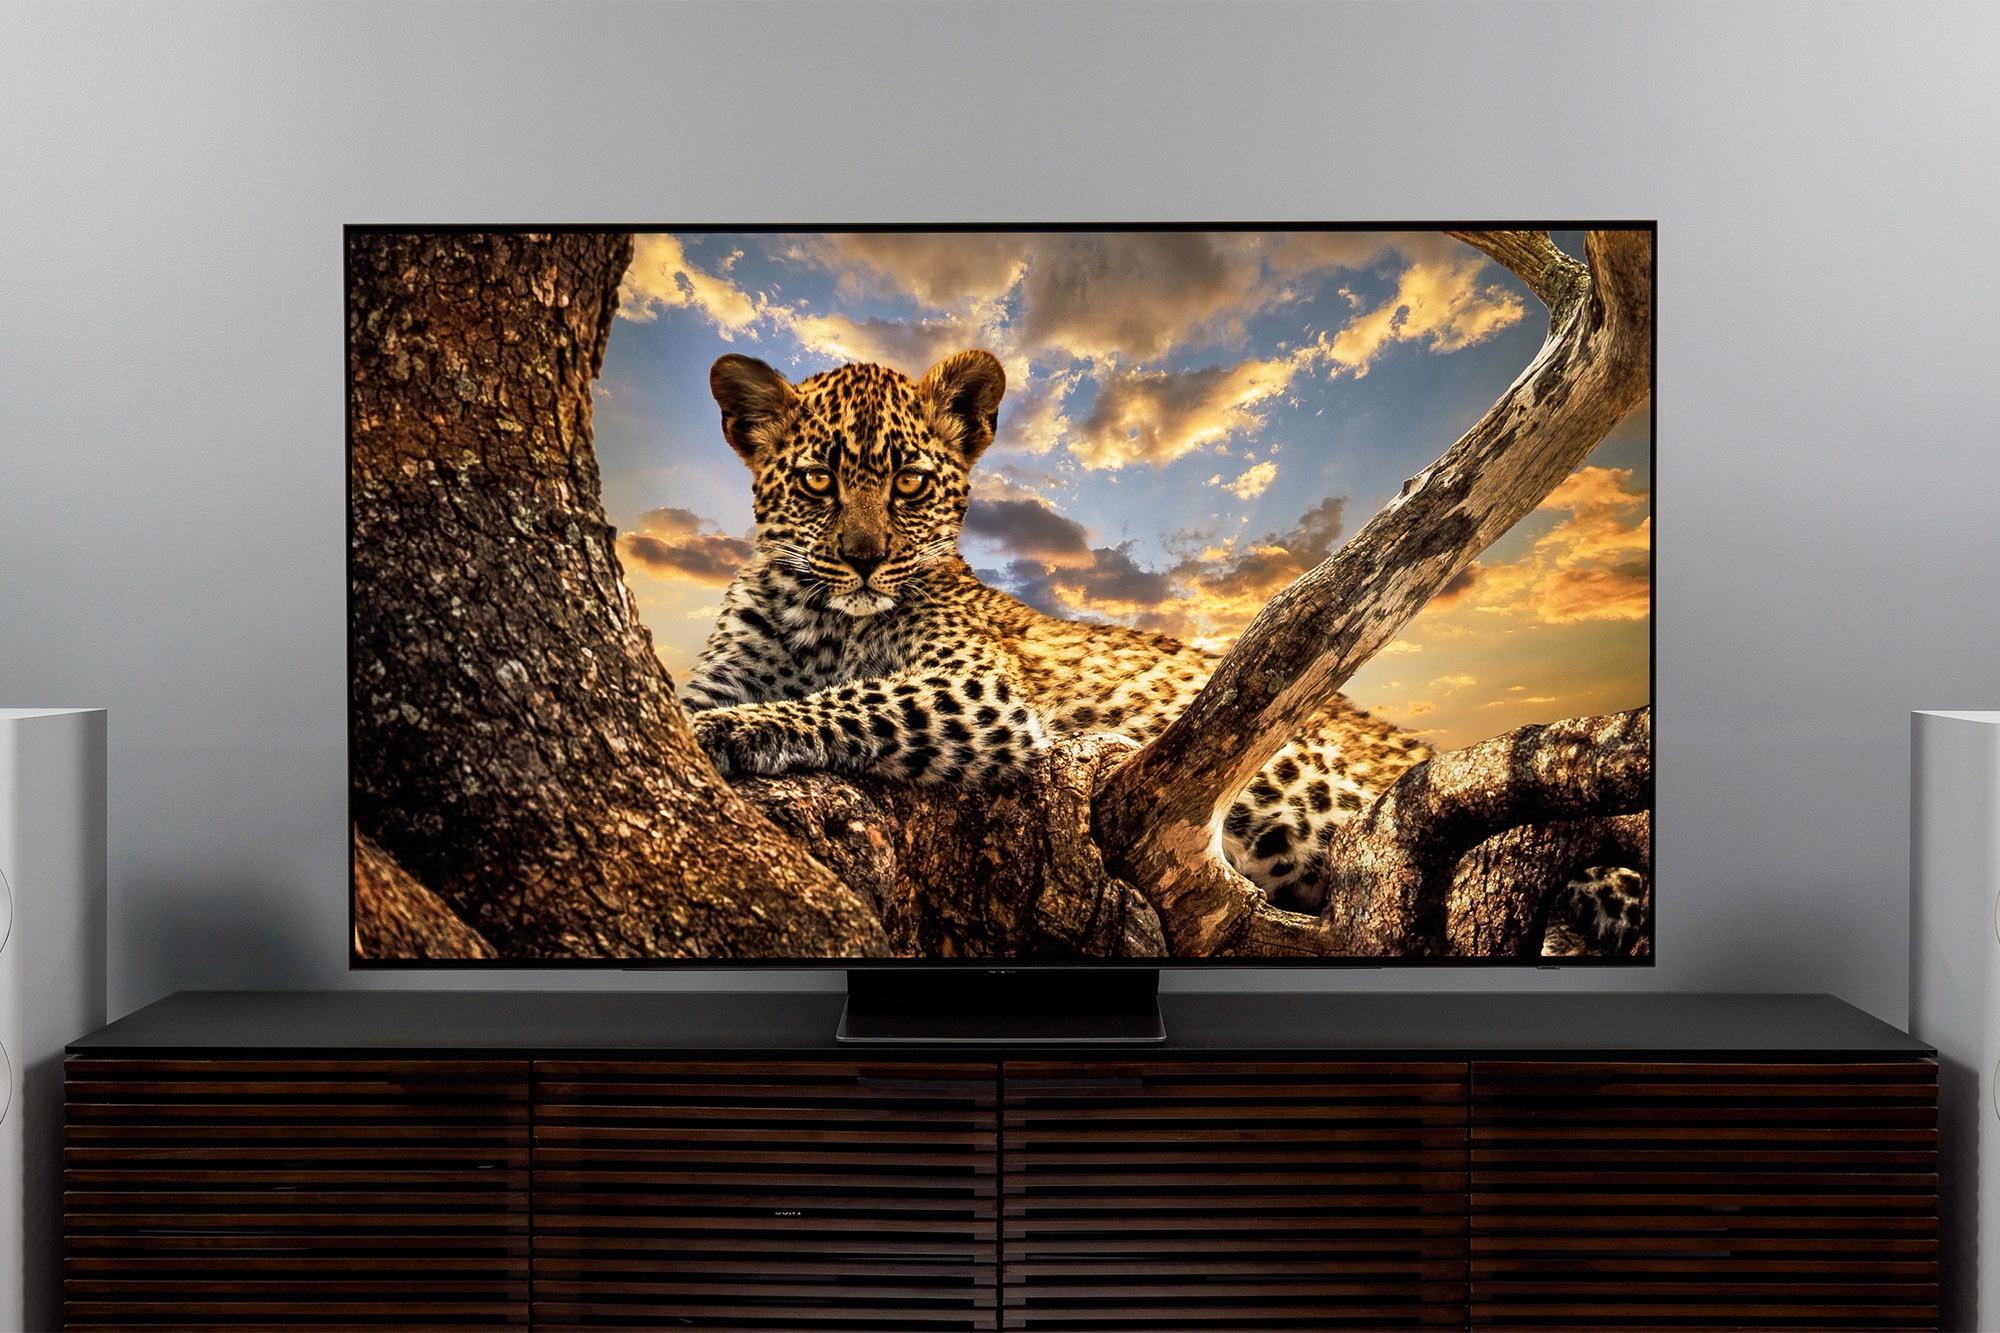 Samsung 55-Inch Class S95B OLED TV Review